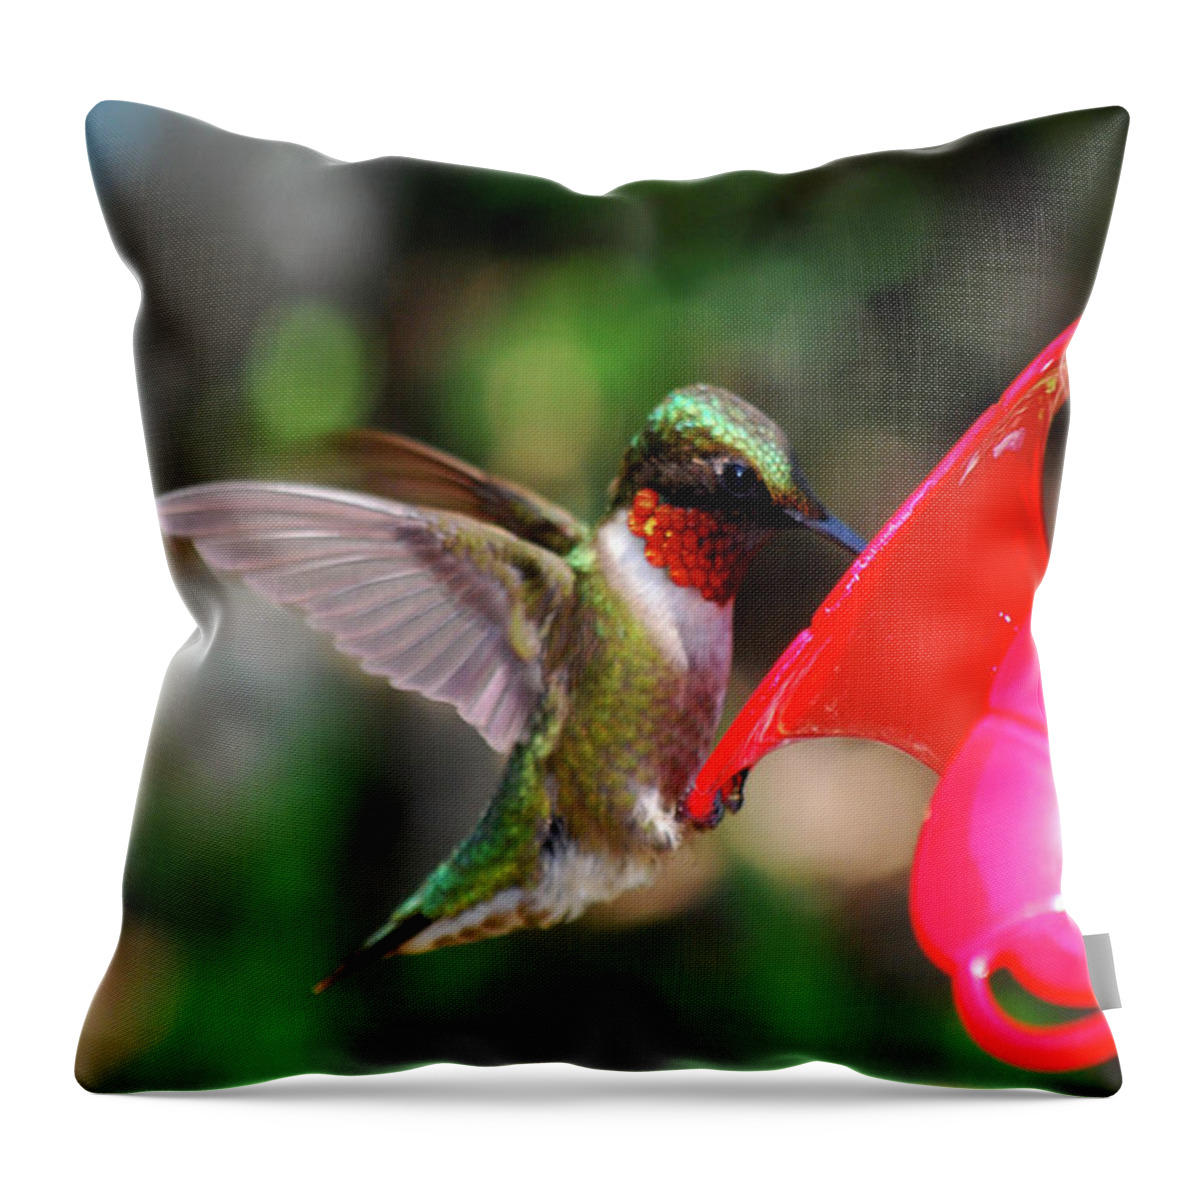 Hummingbird Throw Pillow featuring the photograph Radiant Ruby by Lori Tambakis